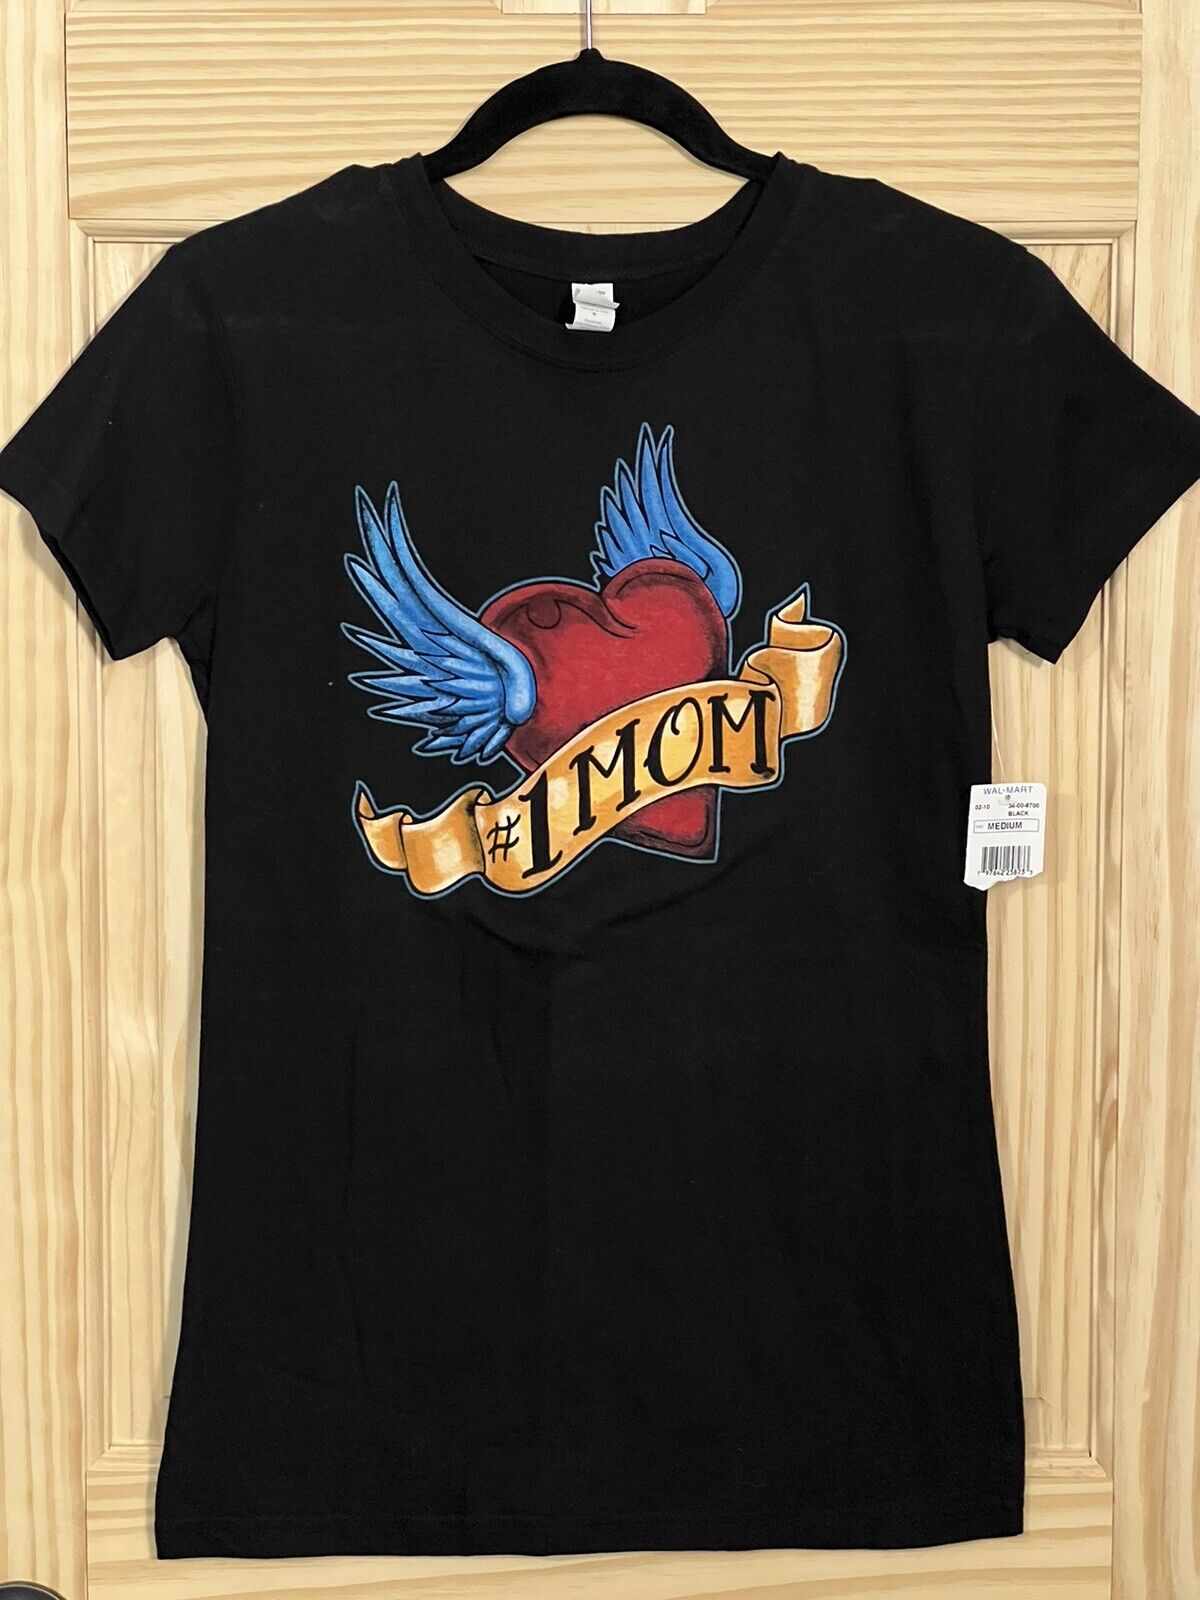 #1 Mom Womans Short Sleeve Tshirt Heart With Wings Banner Mothers Day Love